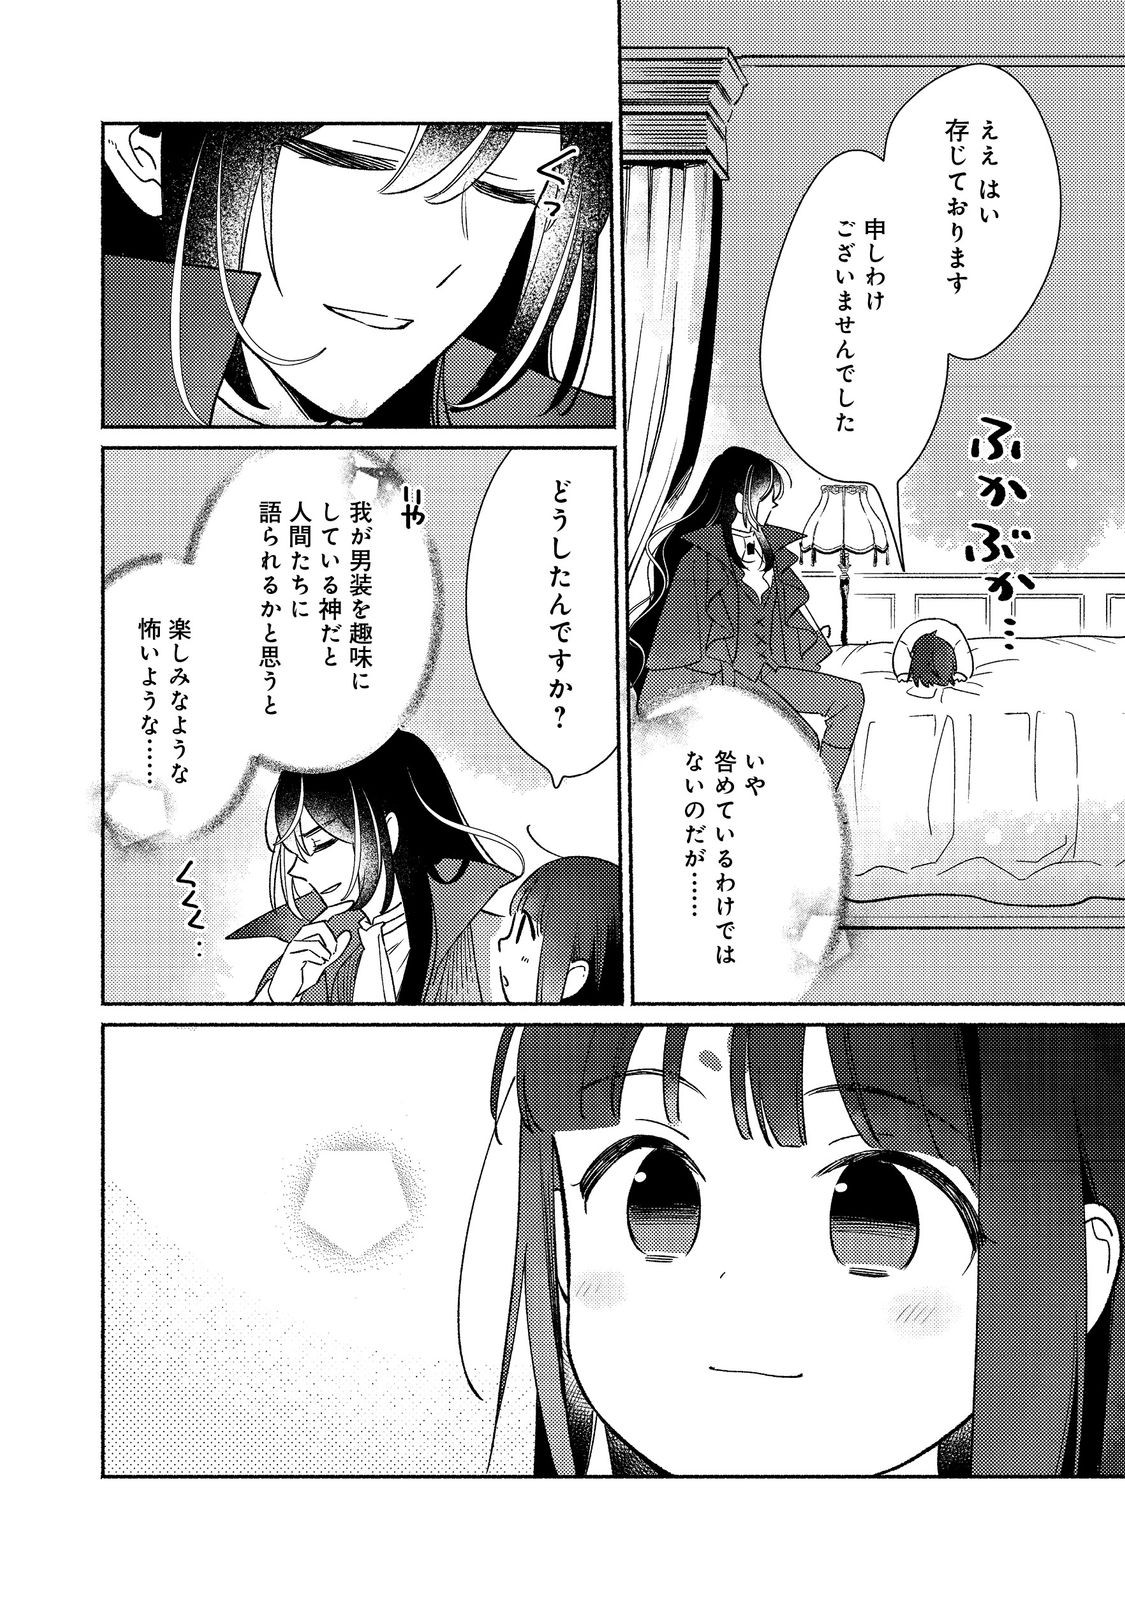 I’m the White Pig Nobleman 第26.2話 - Page 13